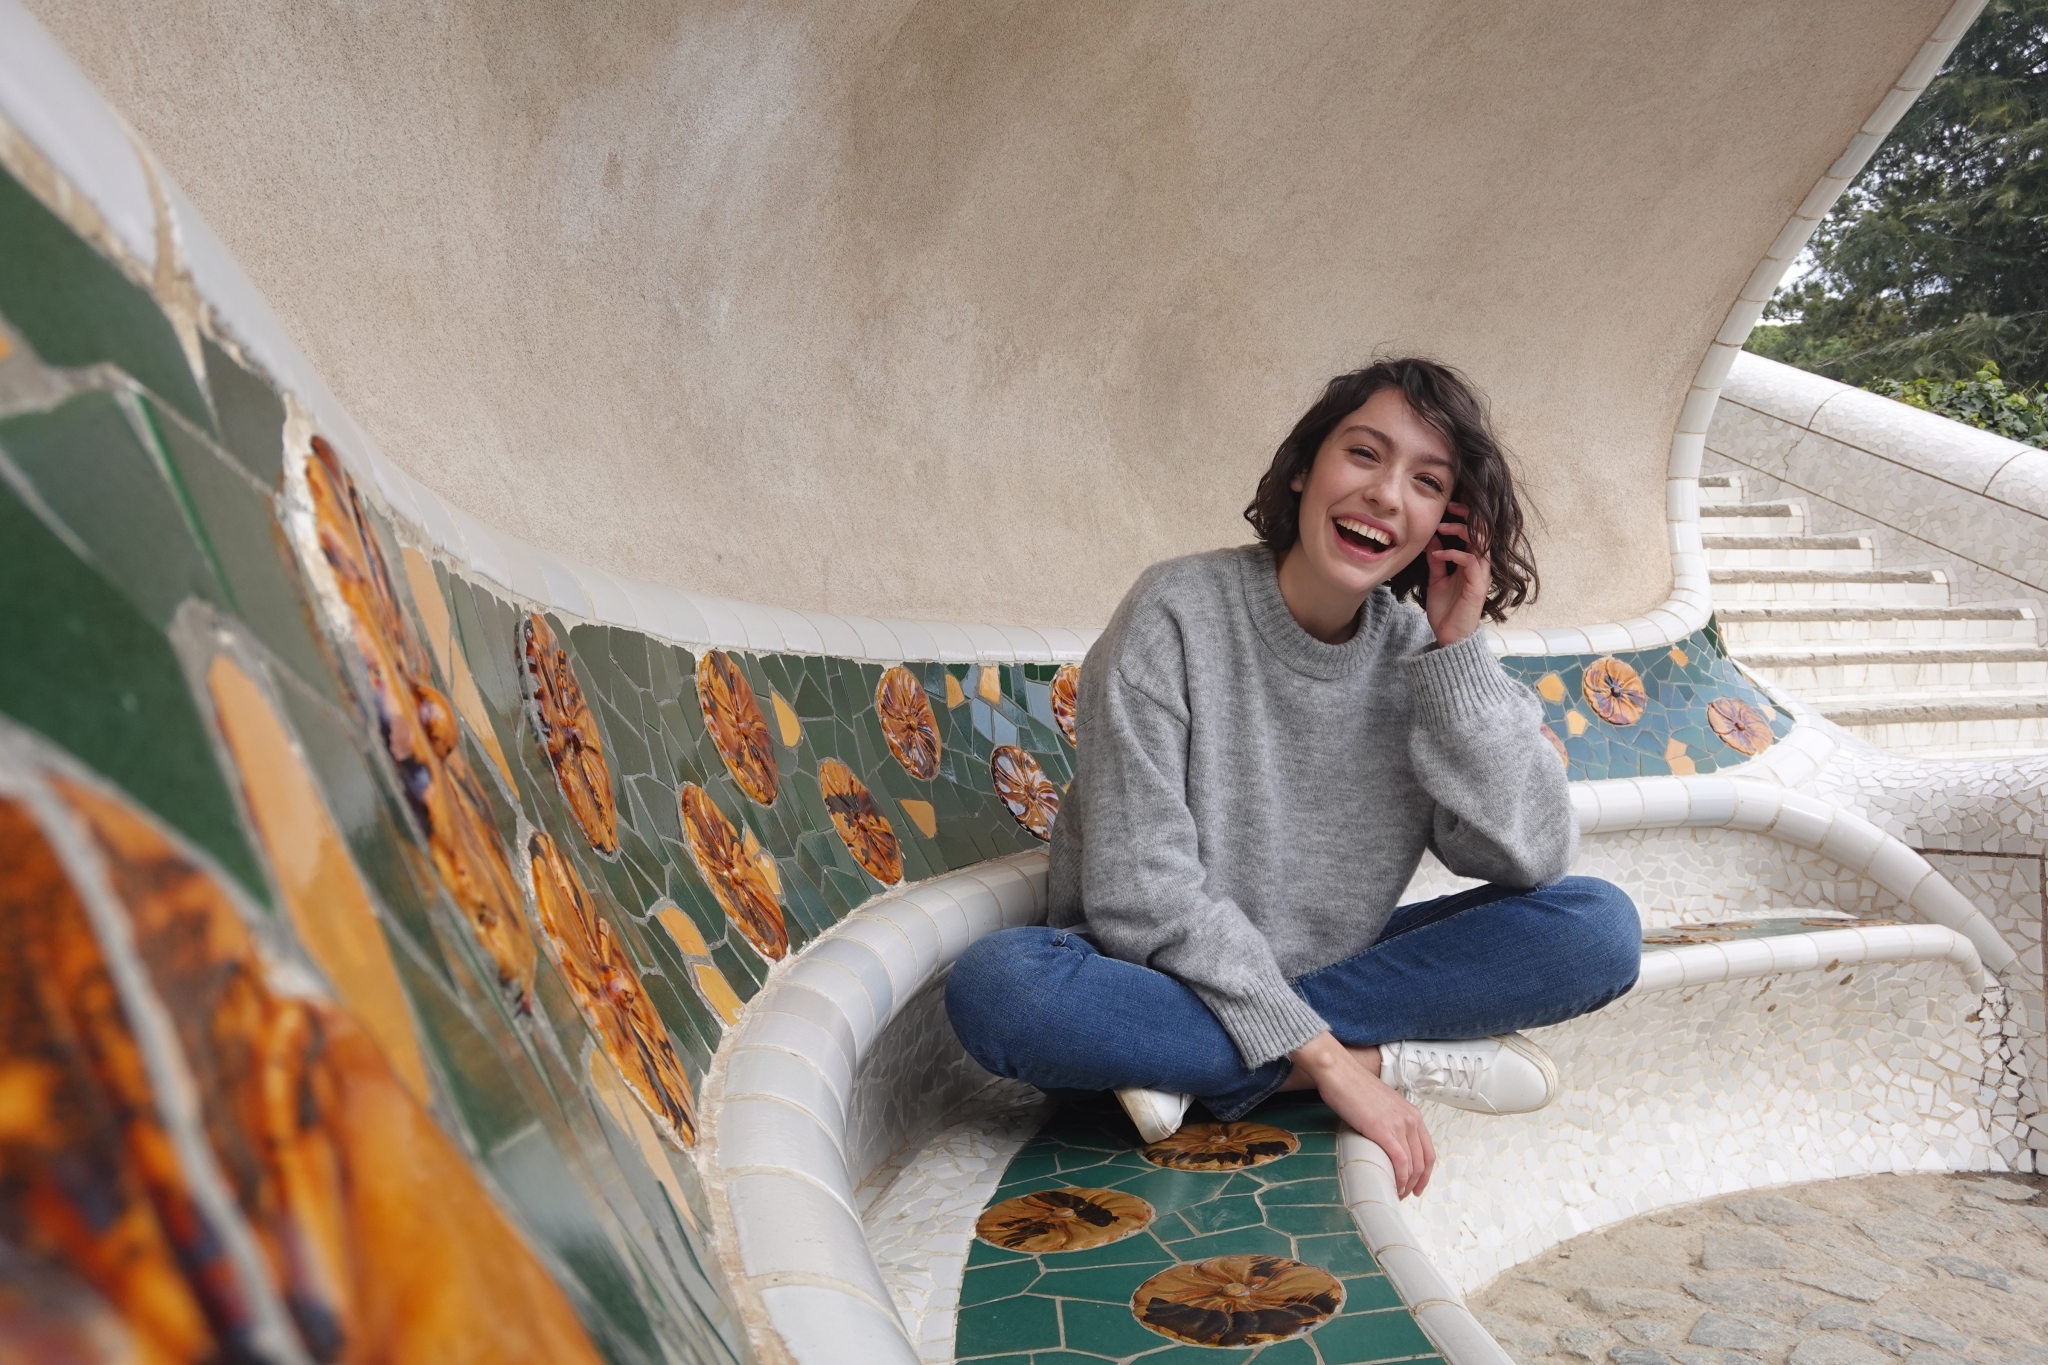 Female model sat on a white stone curved bench with colourful tiles